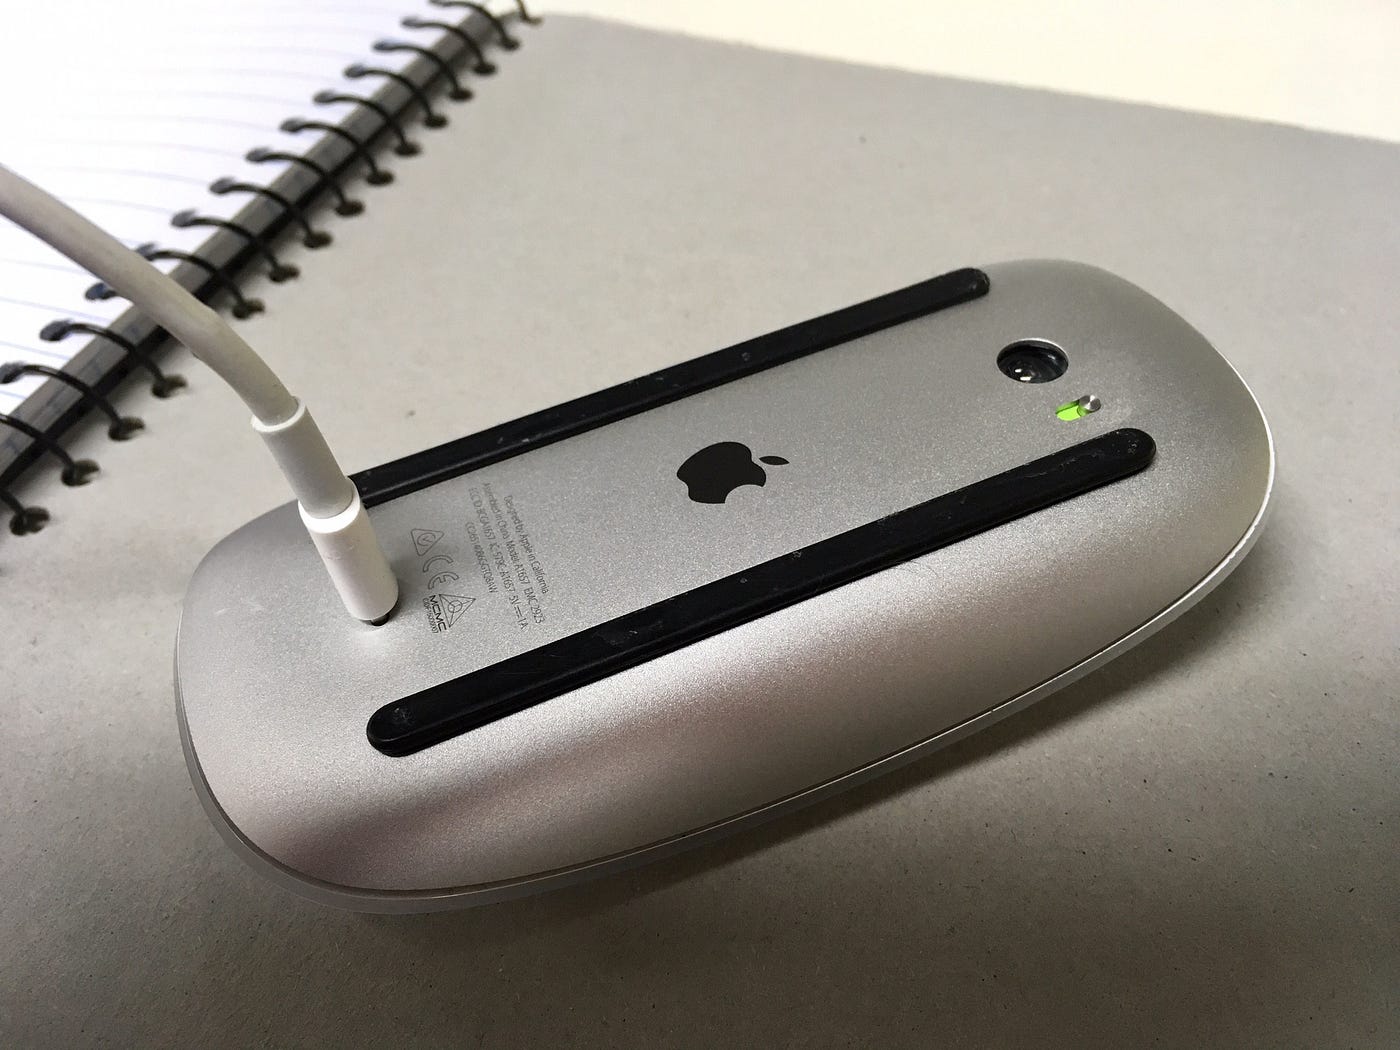 Magic mouse 3 Wireless - Space gray